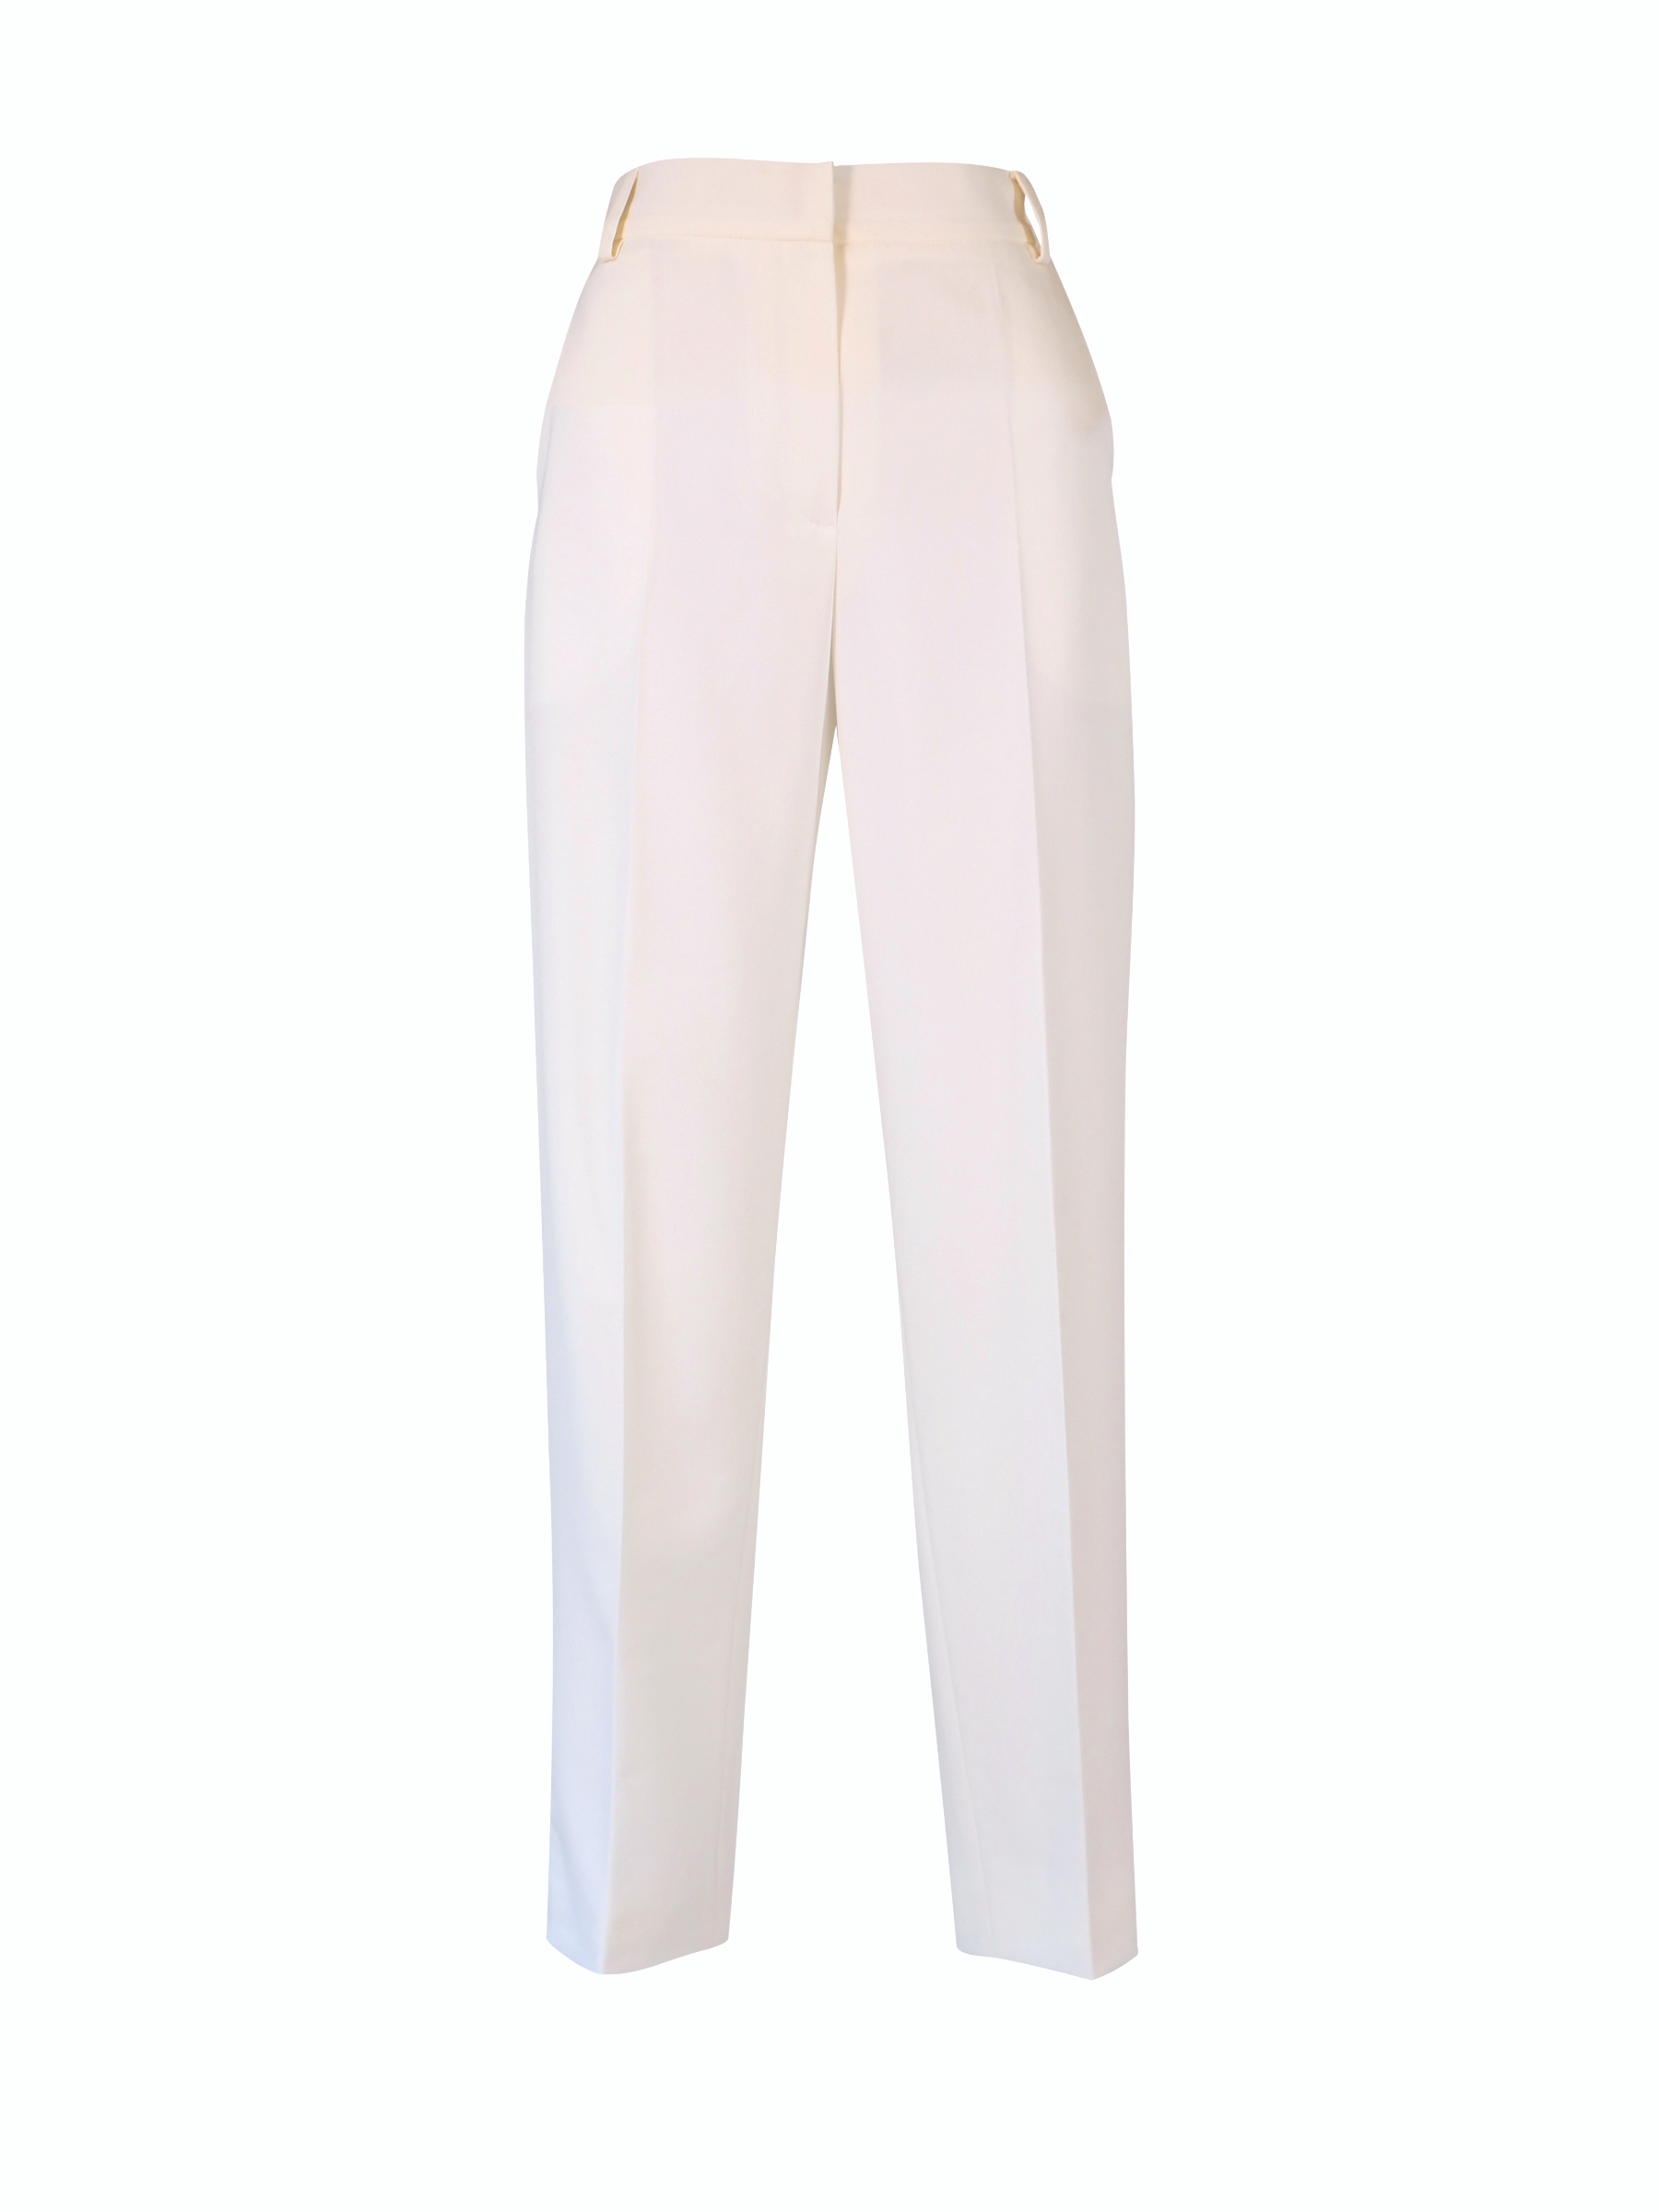 Pearl White Trousers